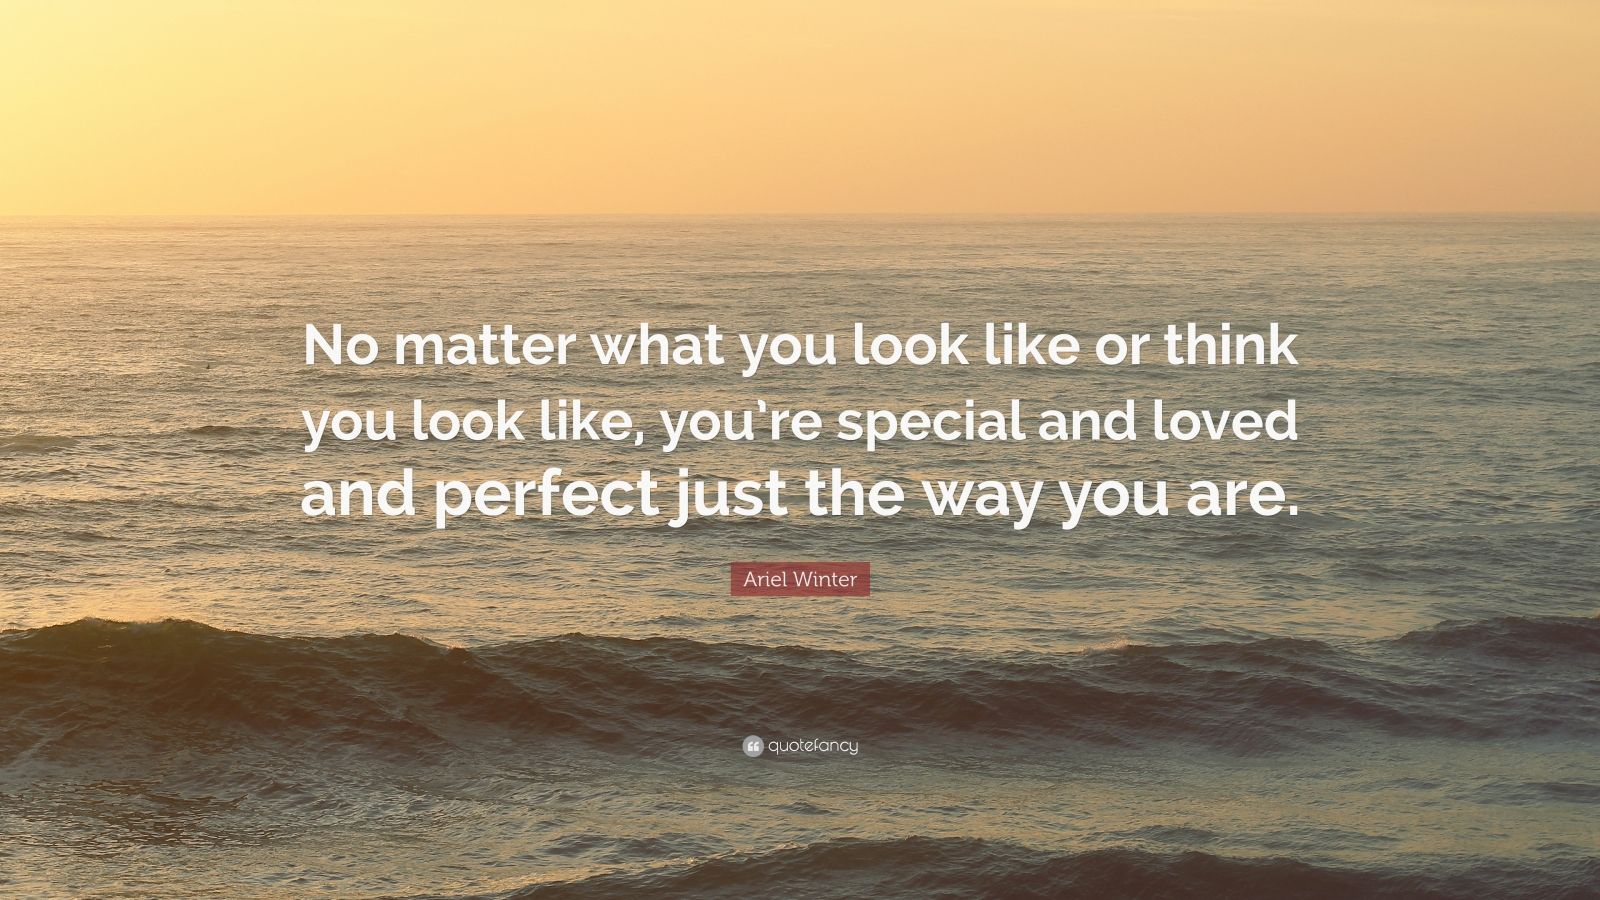 Ariel Winter Quote: “No matter what you look like or think you ...